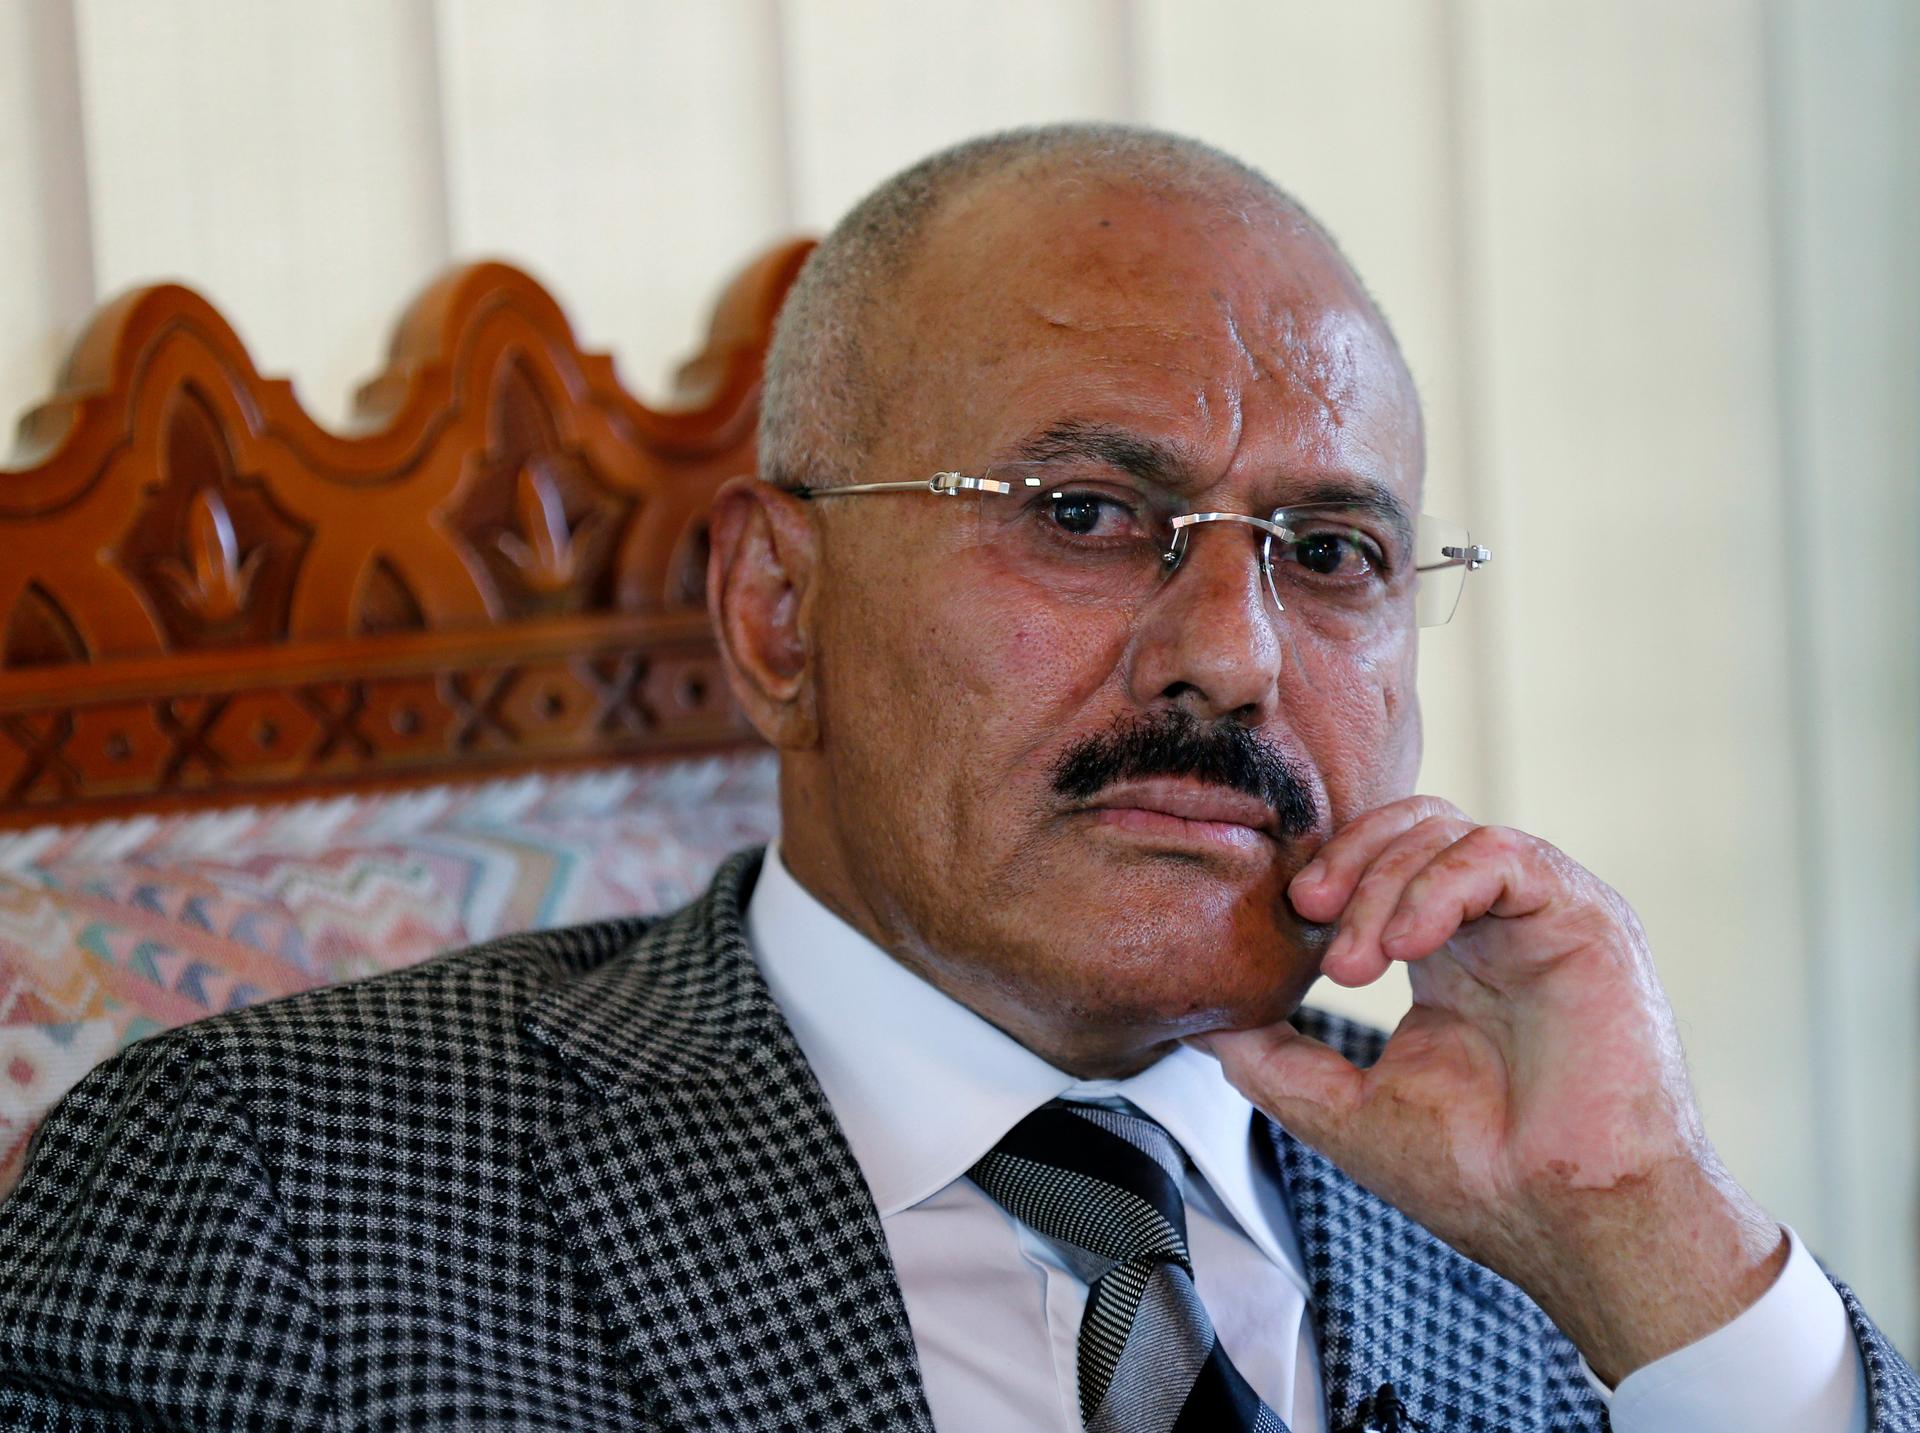 Yemen's former president, Ali Abdullah Saleh, pauses during an interview with Reuters in Sanaa on May 21, 2014.